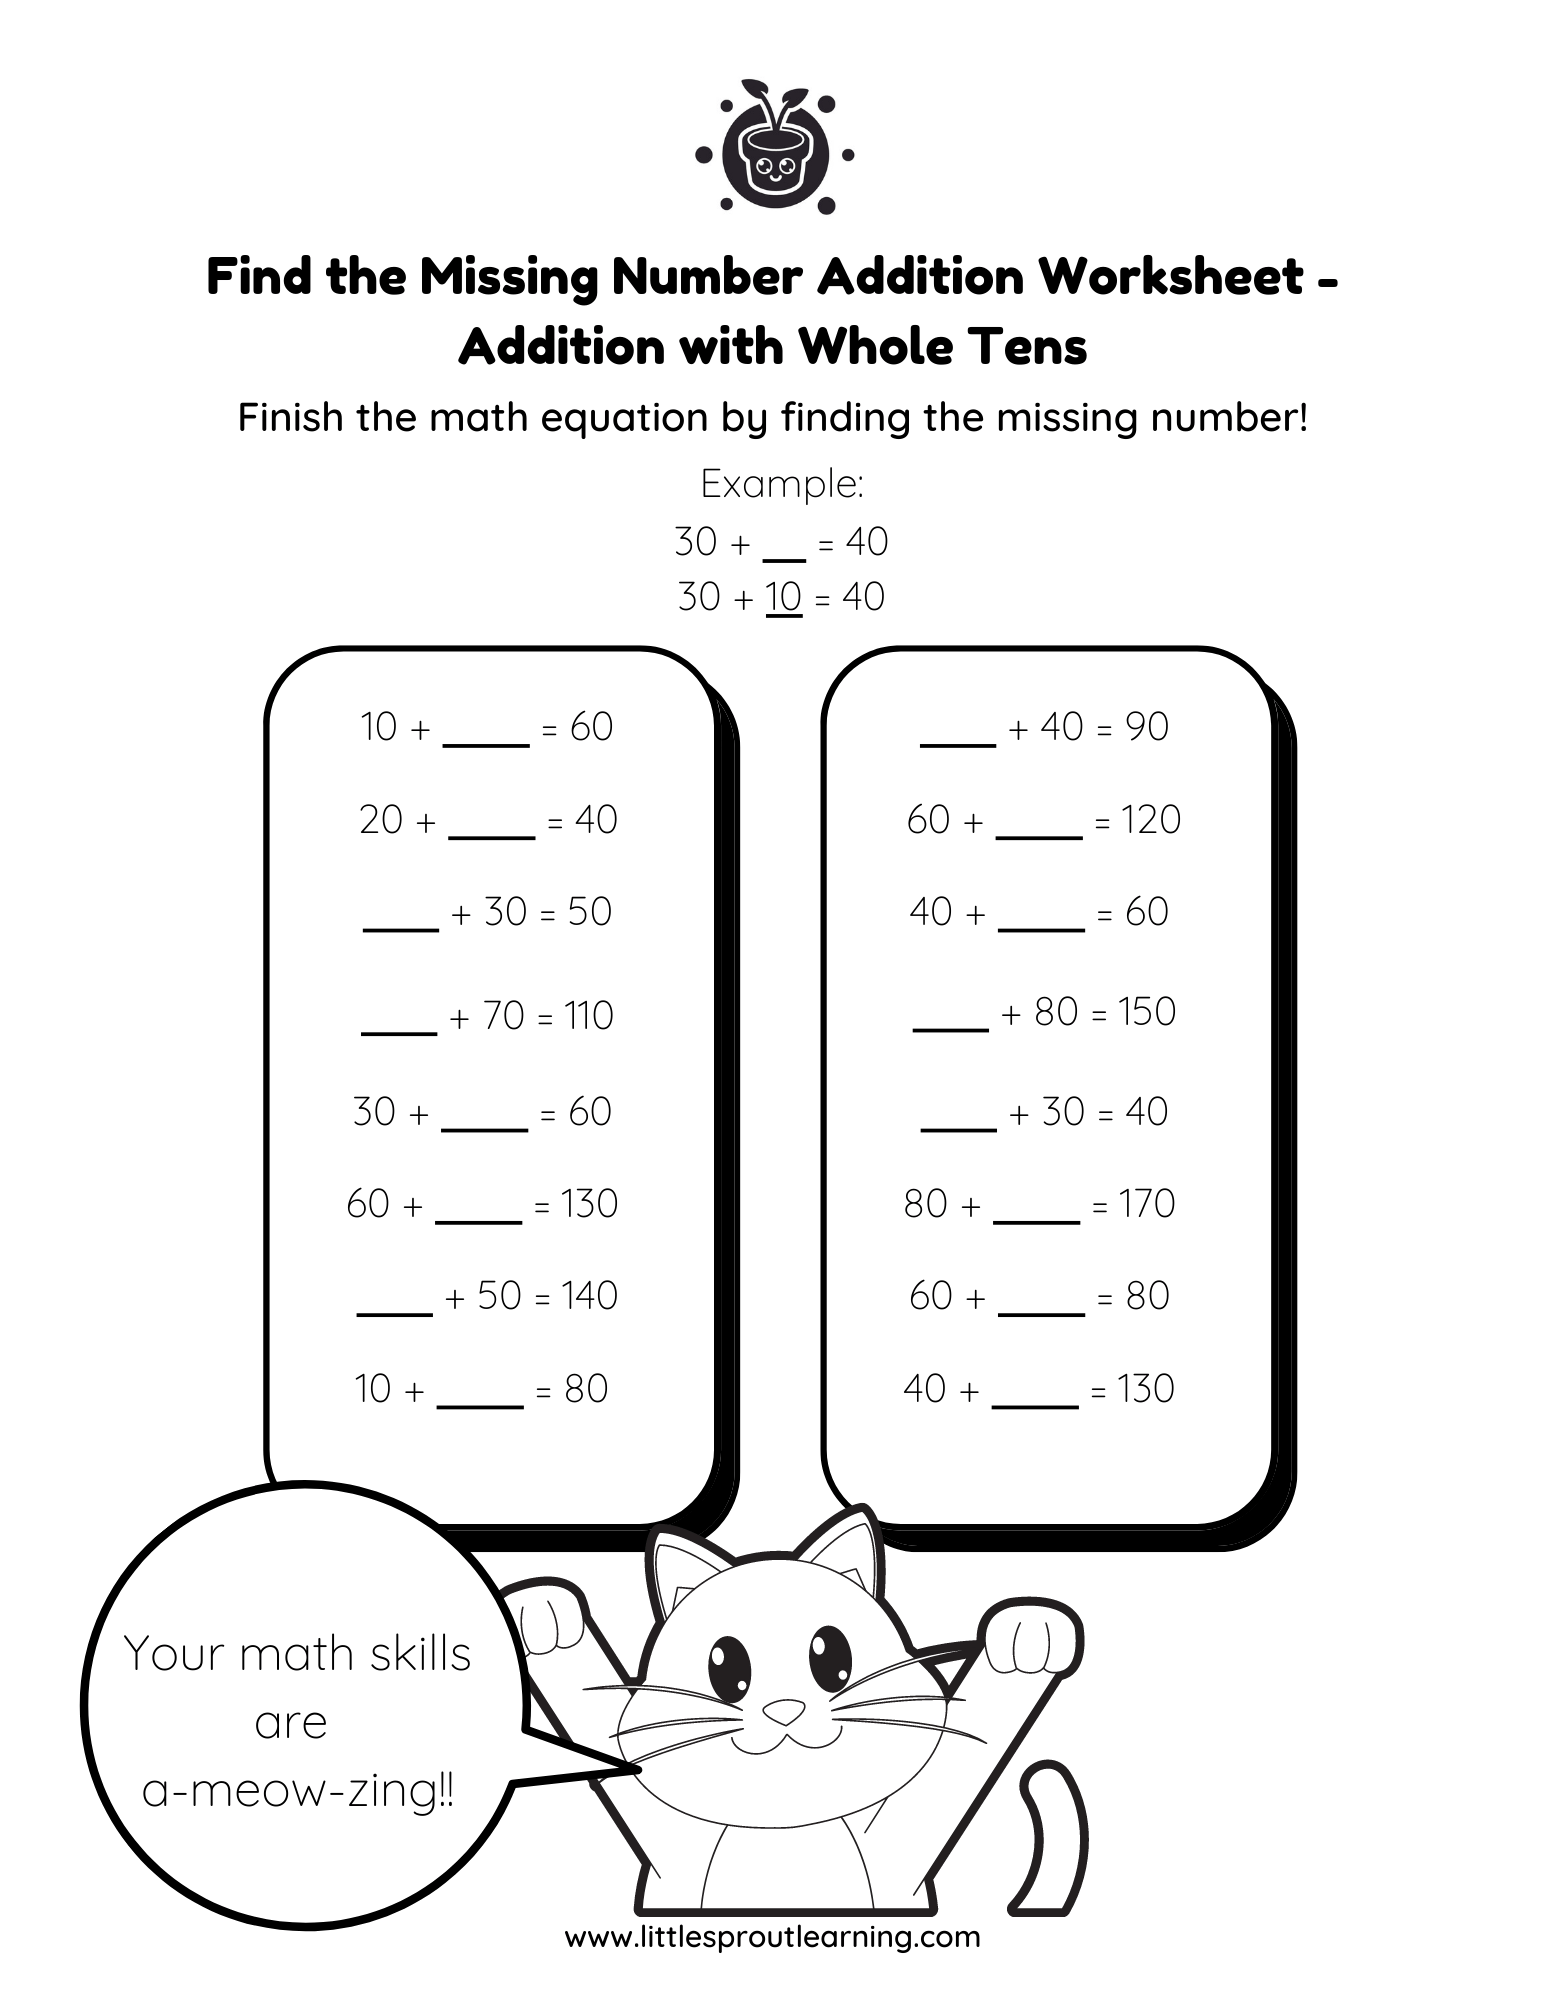 Feature Image Grade 2 Find the Missing Number Addition Worksheet Whole Tens